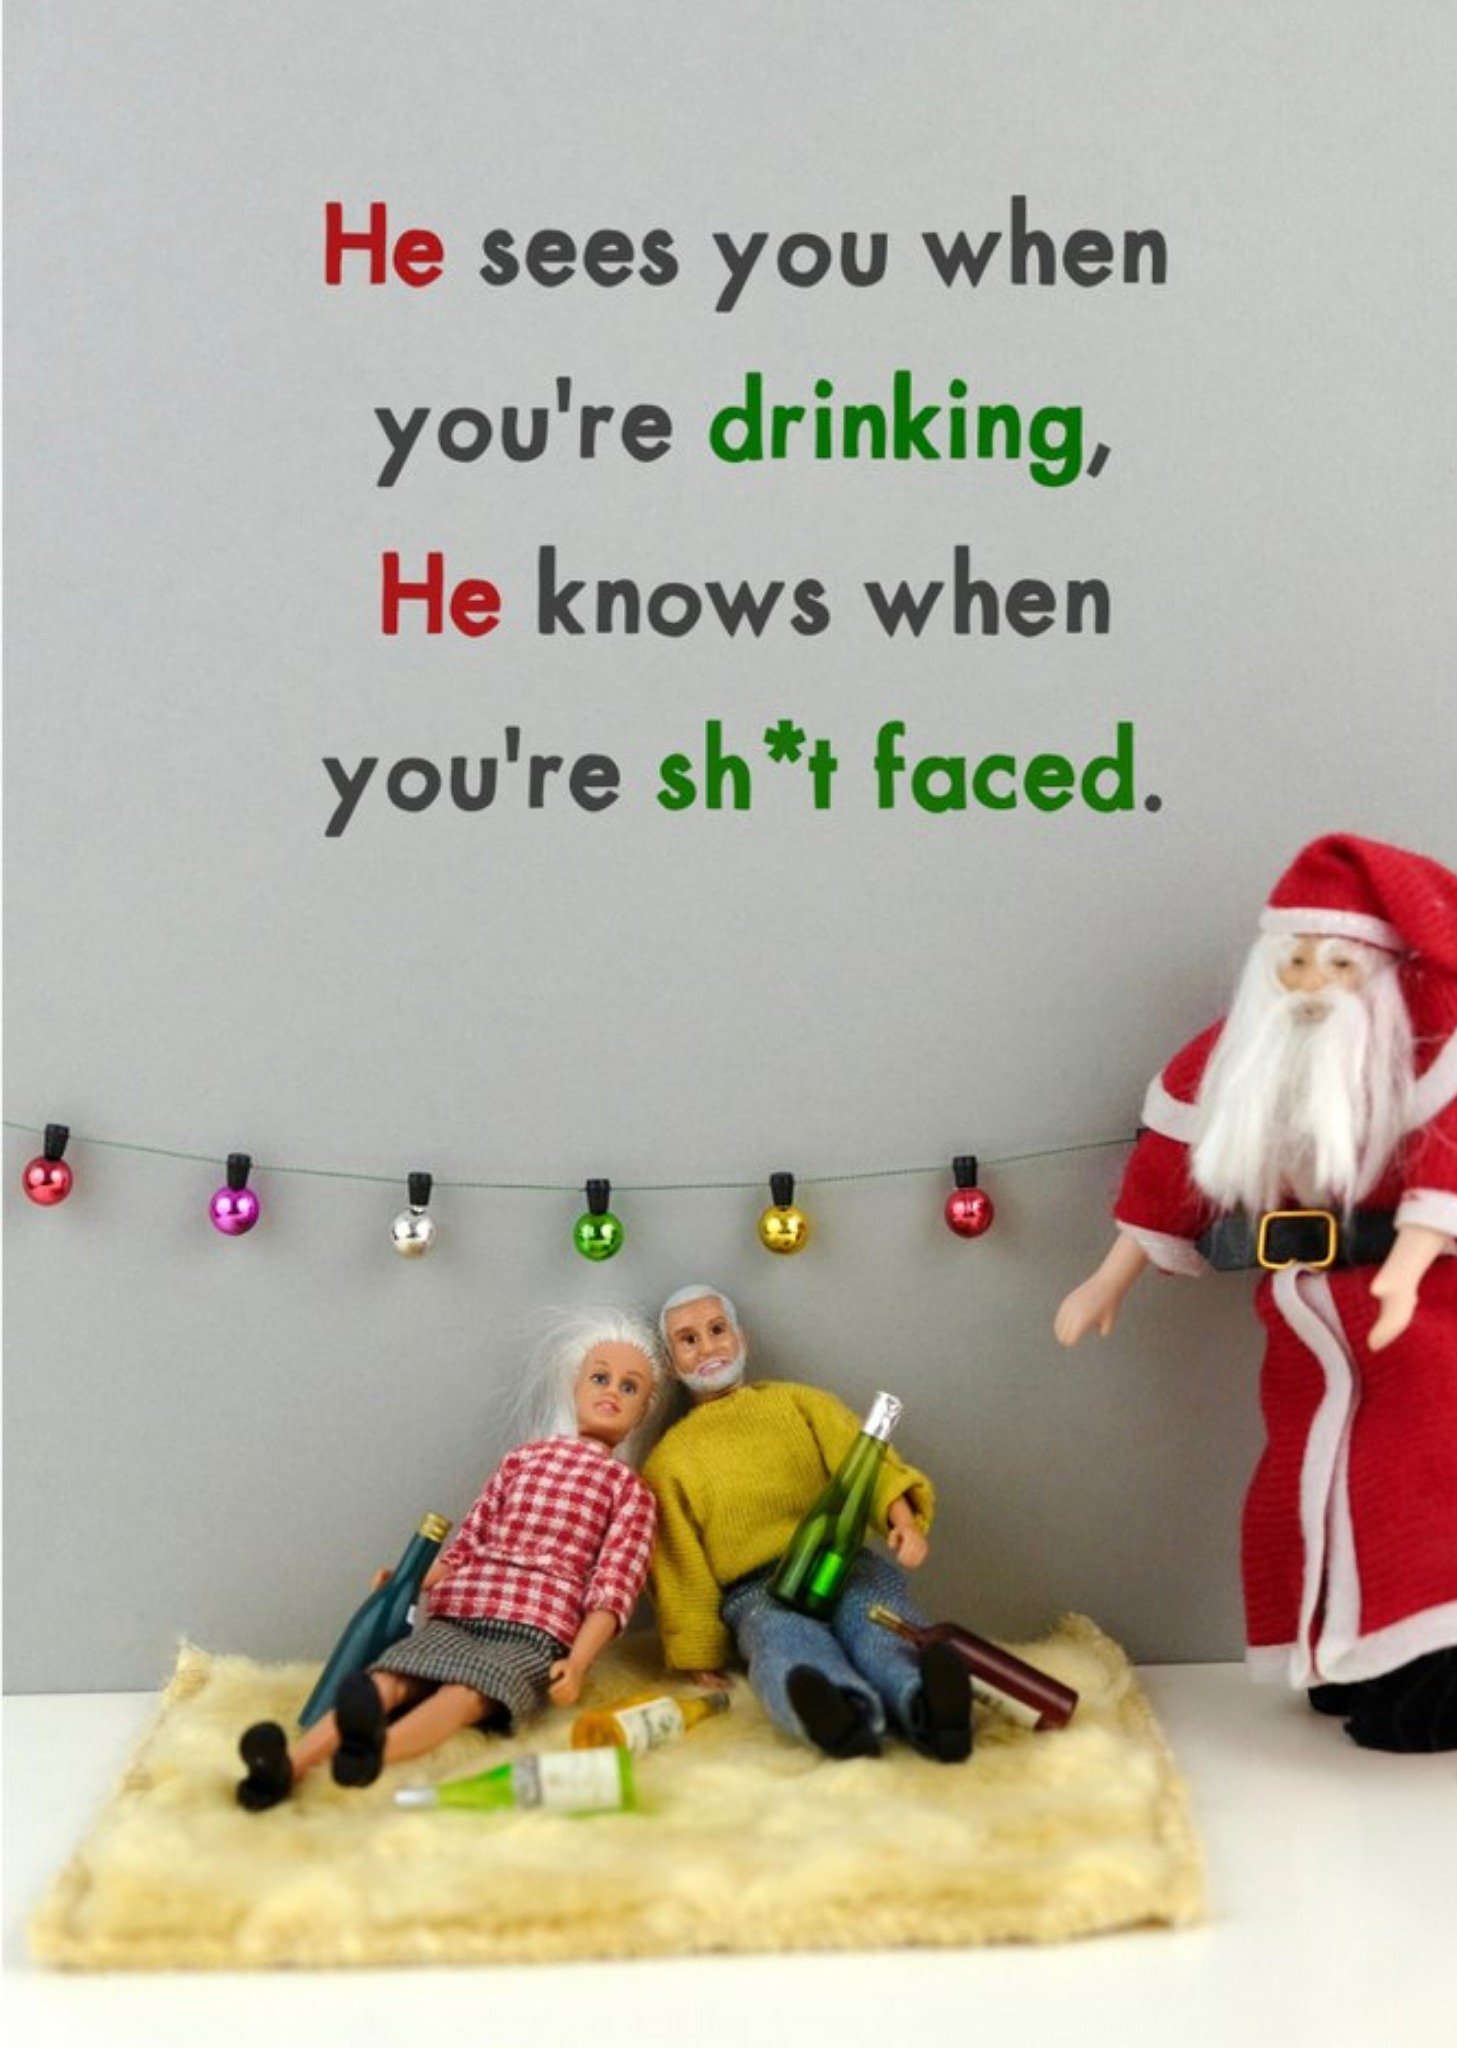 Bold And Bright Funny Dolls He Sees You When You're Drinking Christmas Card Ecard